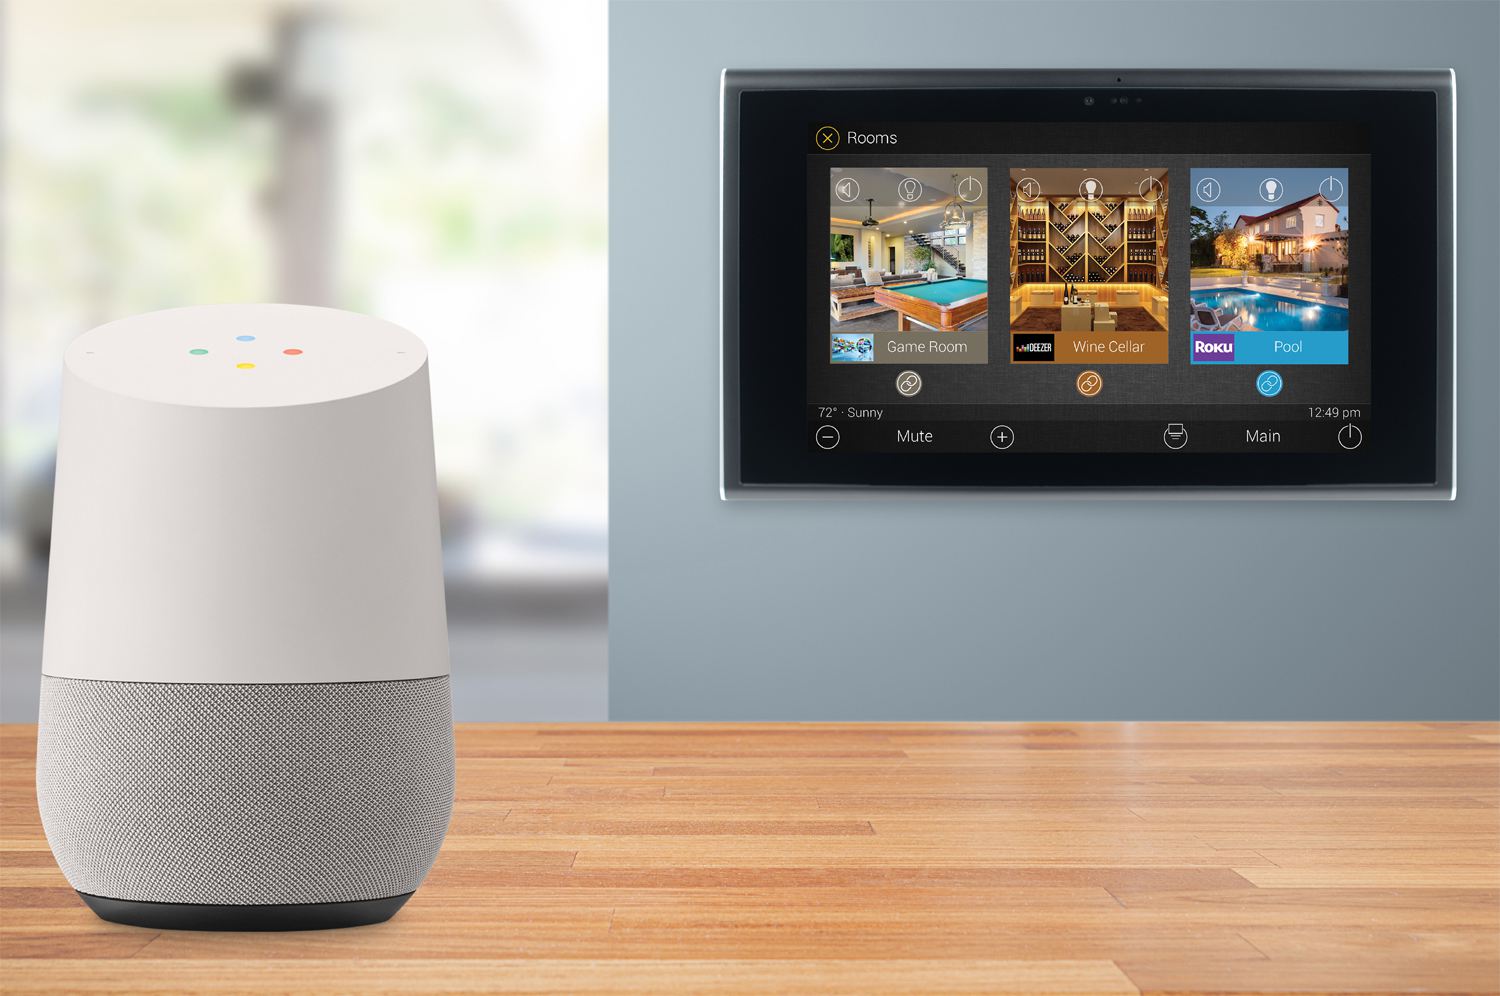 How To Connect Google Home To TV Without Chromecast